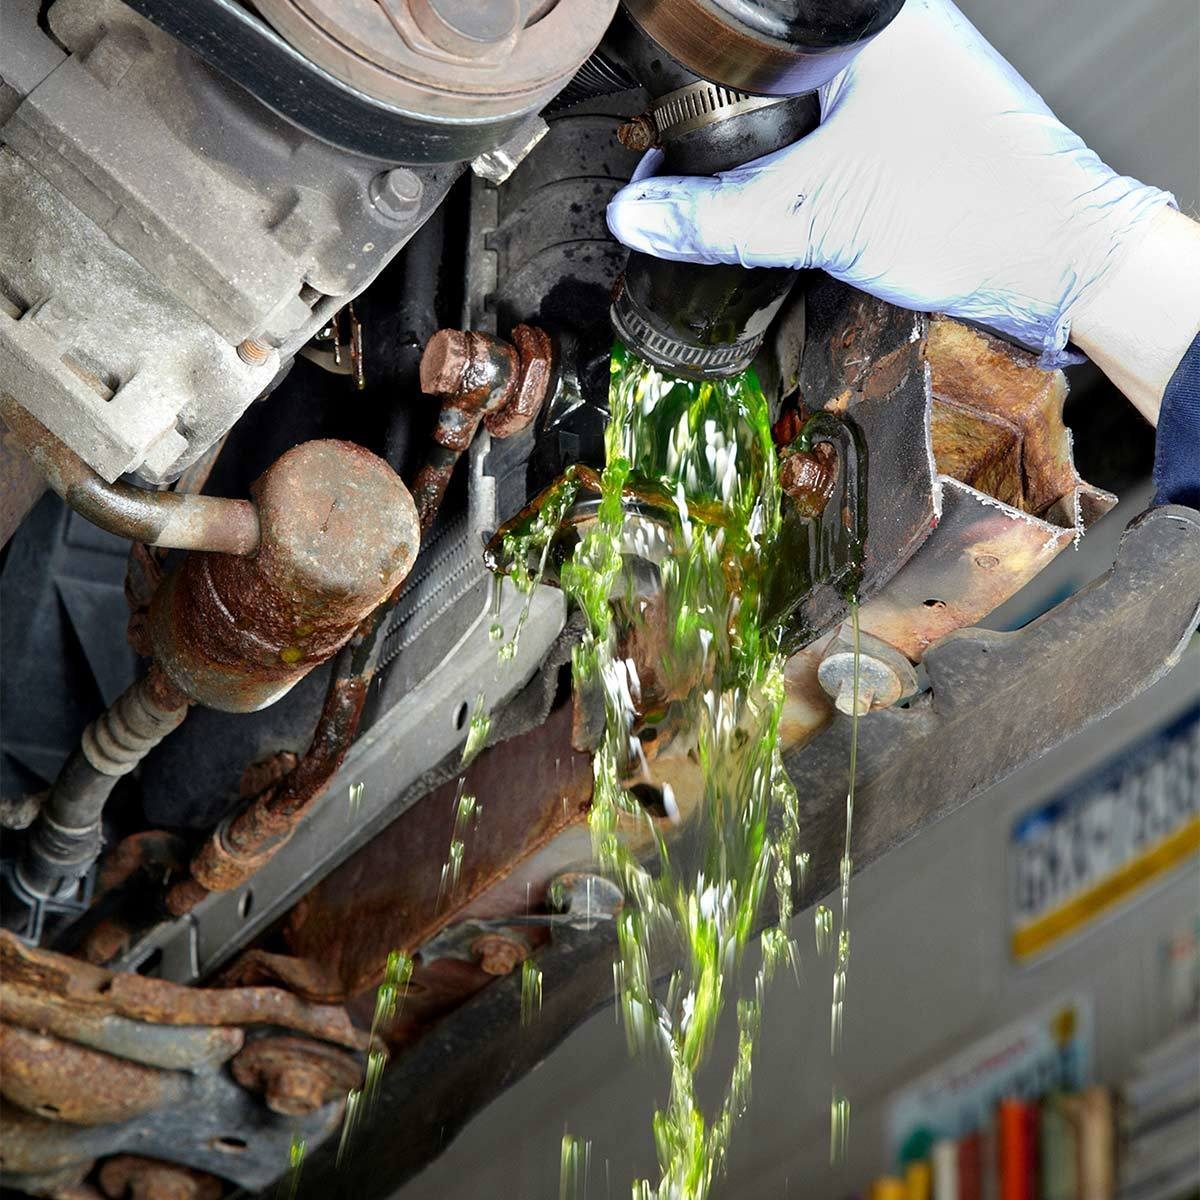 How To Dispose of Antifreeze Safely